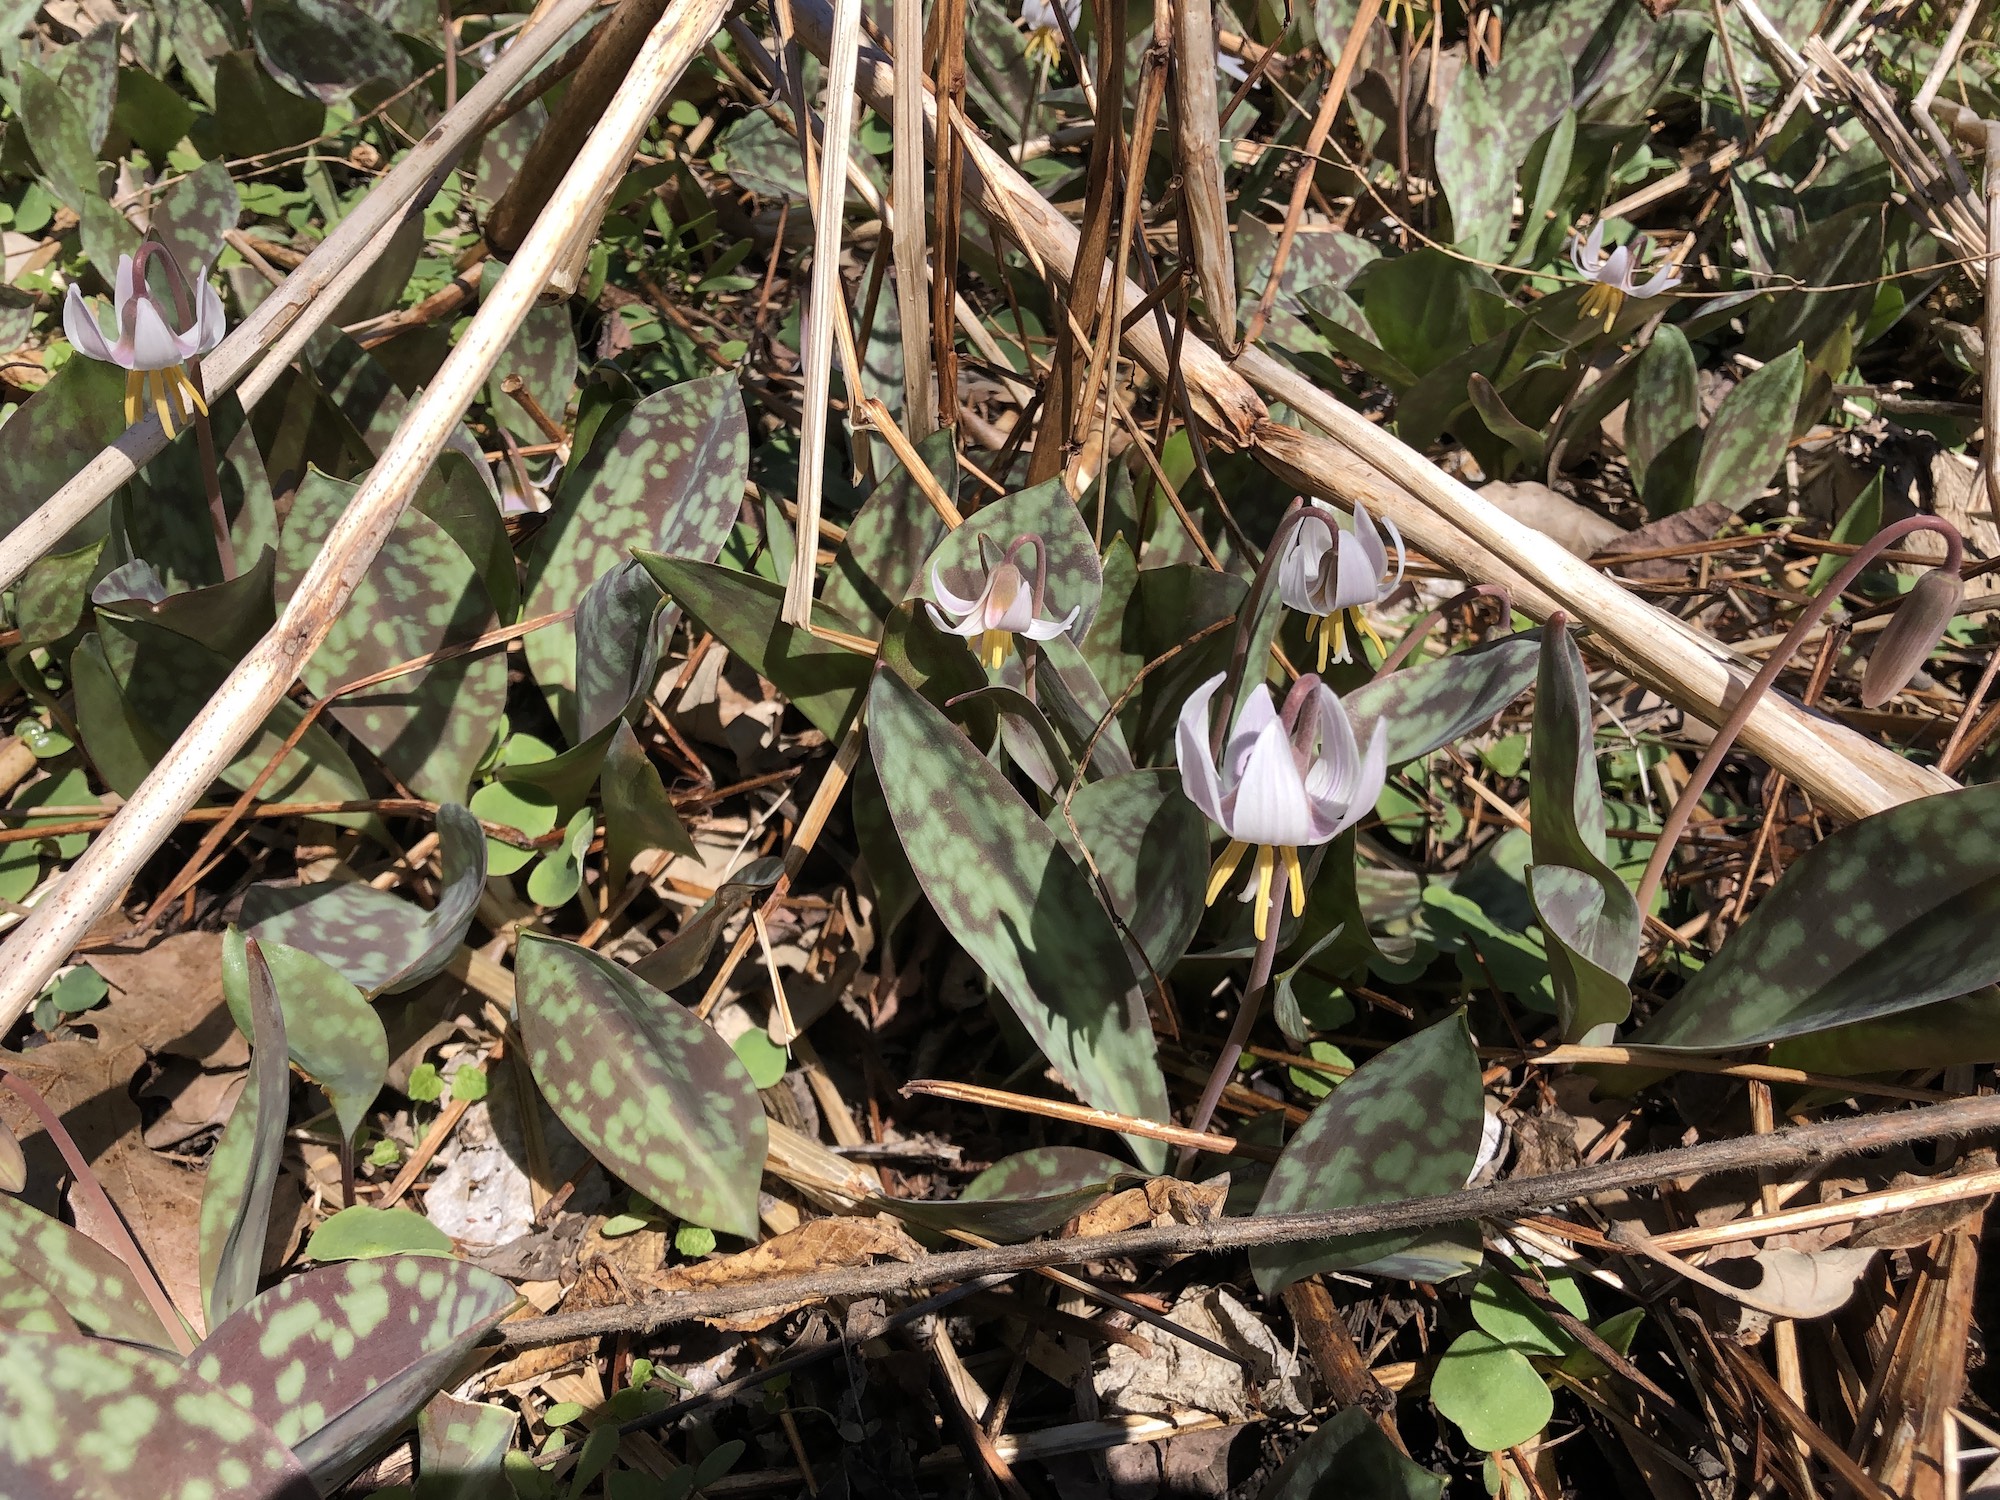 White Trout Lilies on April 19, 2019 near Council Ring.